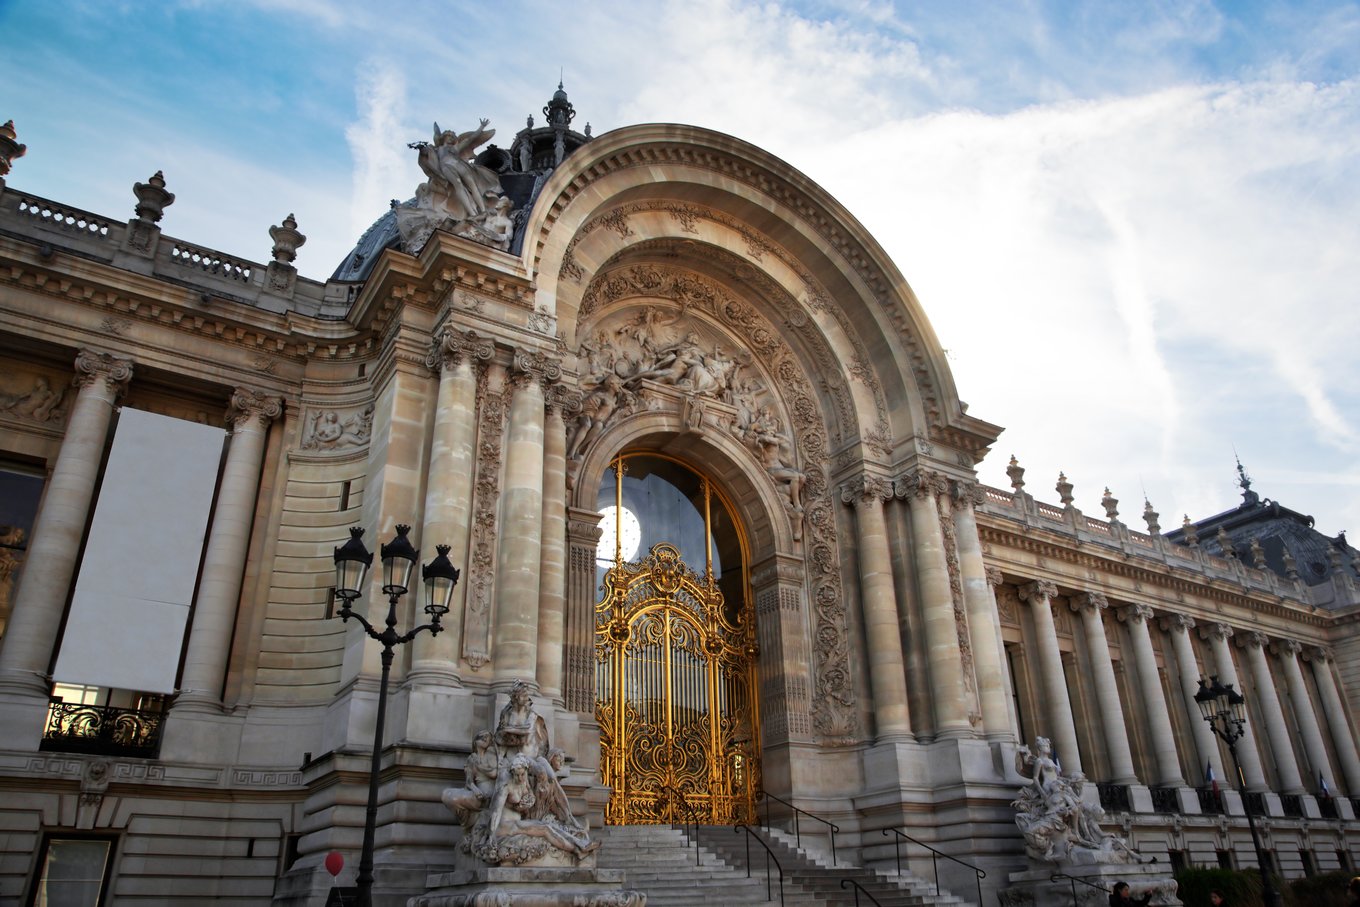 the entrance of paris' petit palais, with its iconic gilded gate and carvings